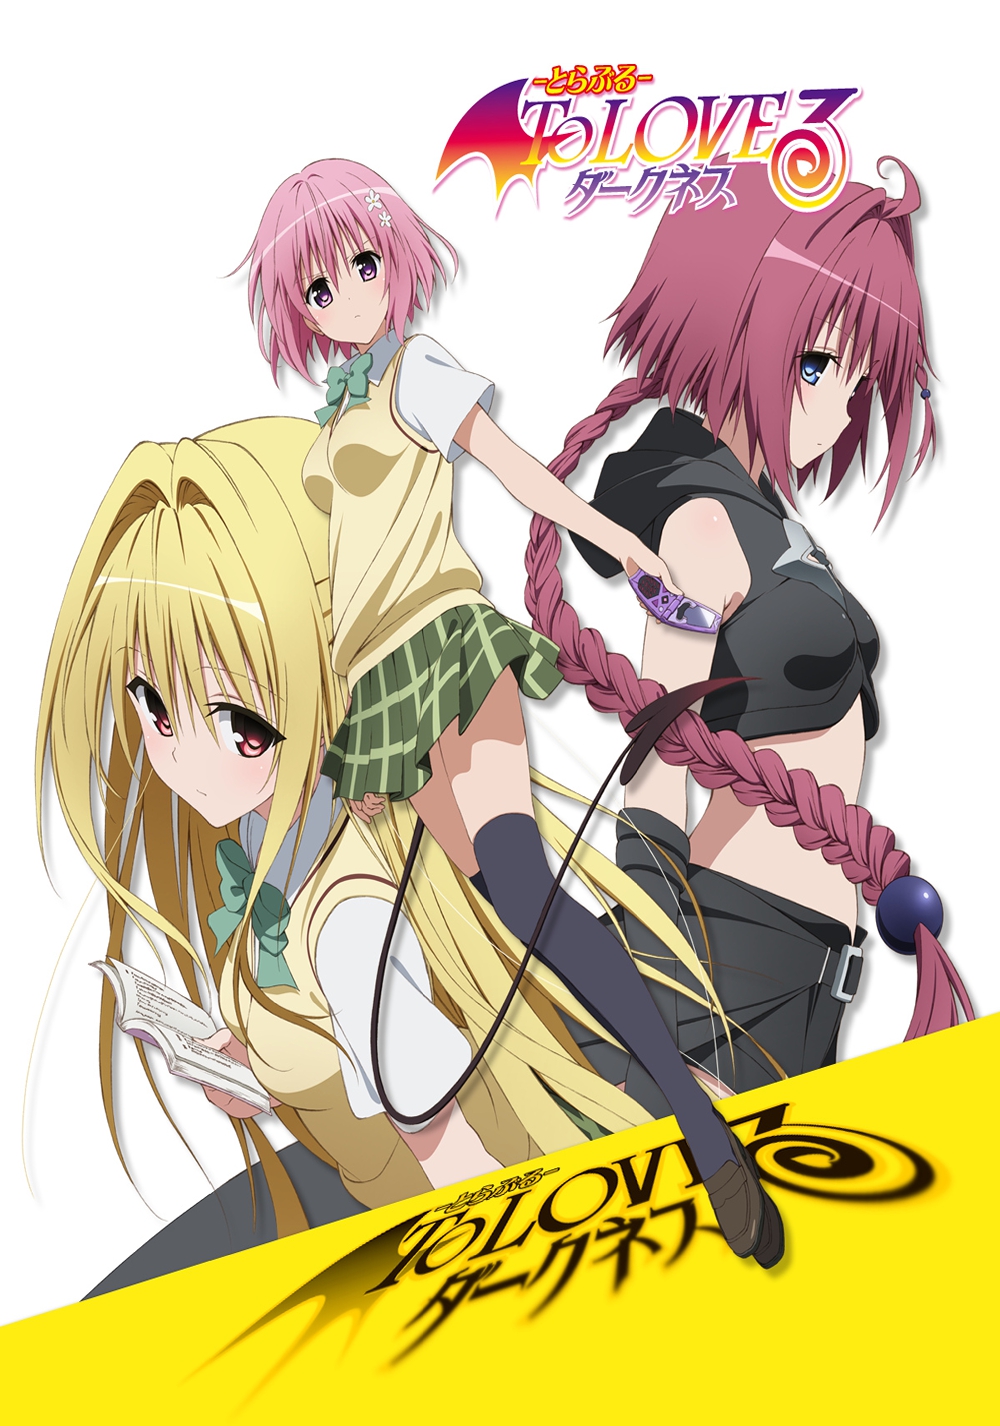 Watch To Loveる とらぶる ダークネス To Love Ru Trouble Darkness 第1話 Continue コンティニュー With Original Japanese Voice And Interactive Subtitles